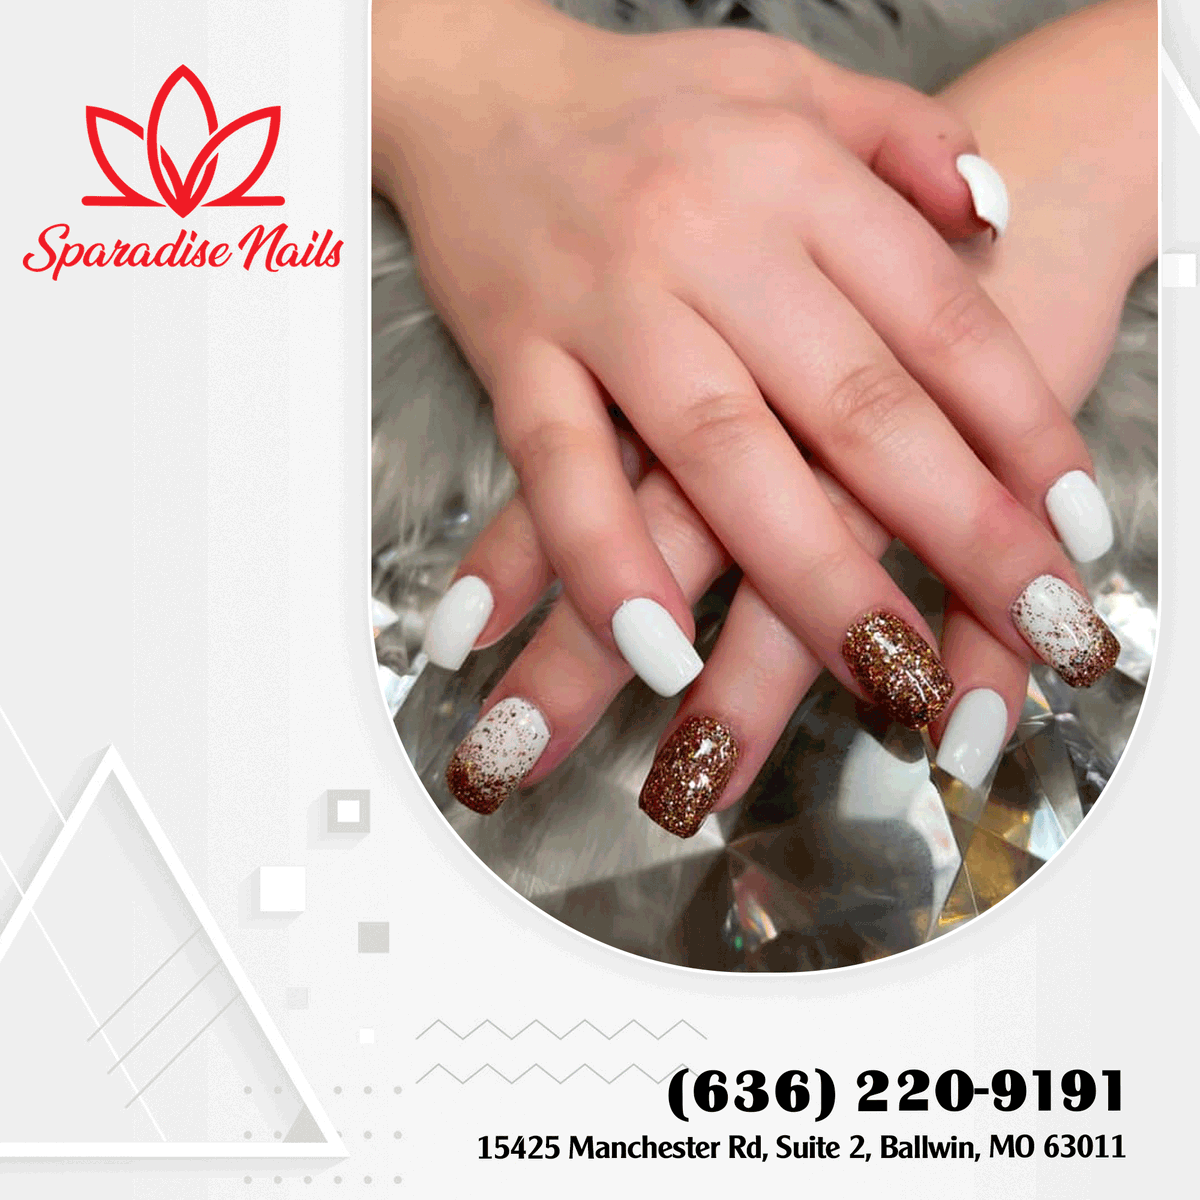 Gold glitter for some glam and white for a fresh start! These nails are ready for anything.🤎✨
*Booking Online: lk.macmarketing.us/SparadiseNails…

#sparadisenails #nailsalon #nails #nailart #nailsalonballwin #naildesign #spa